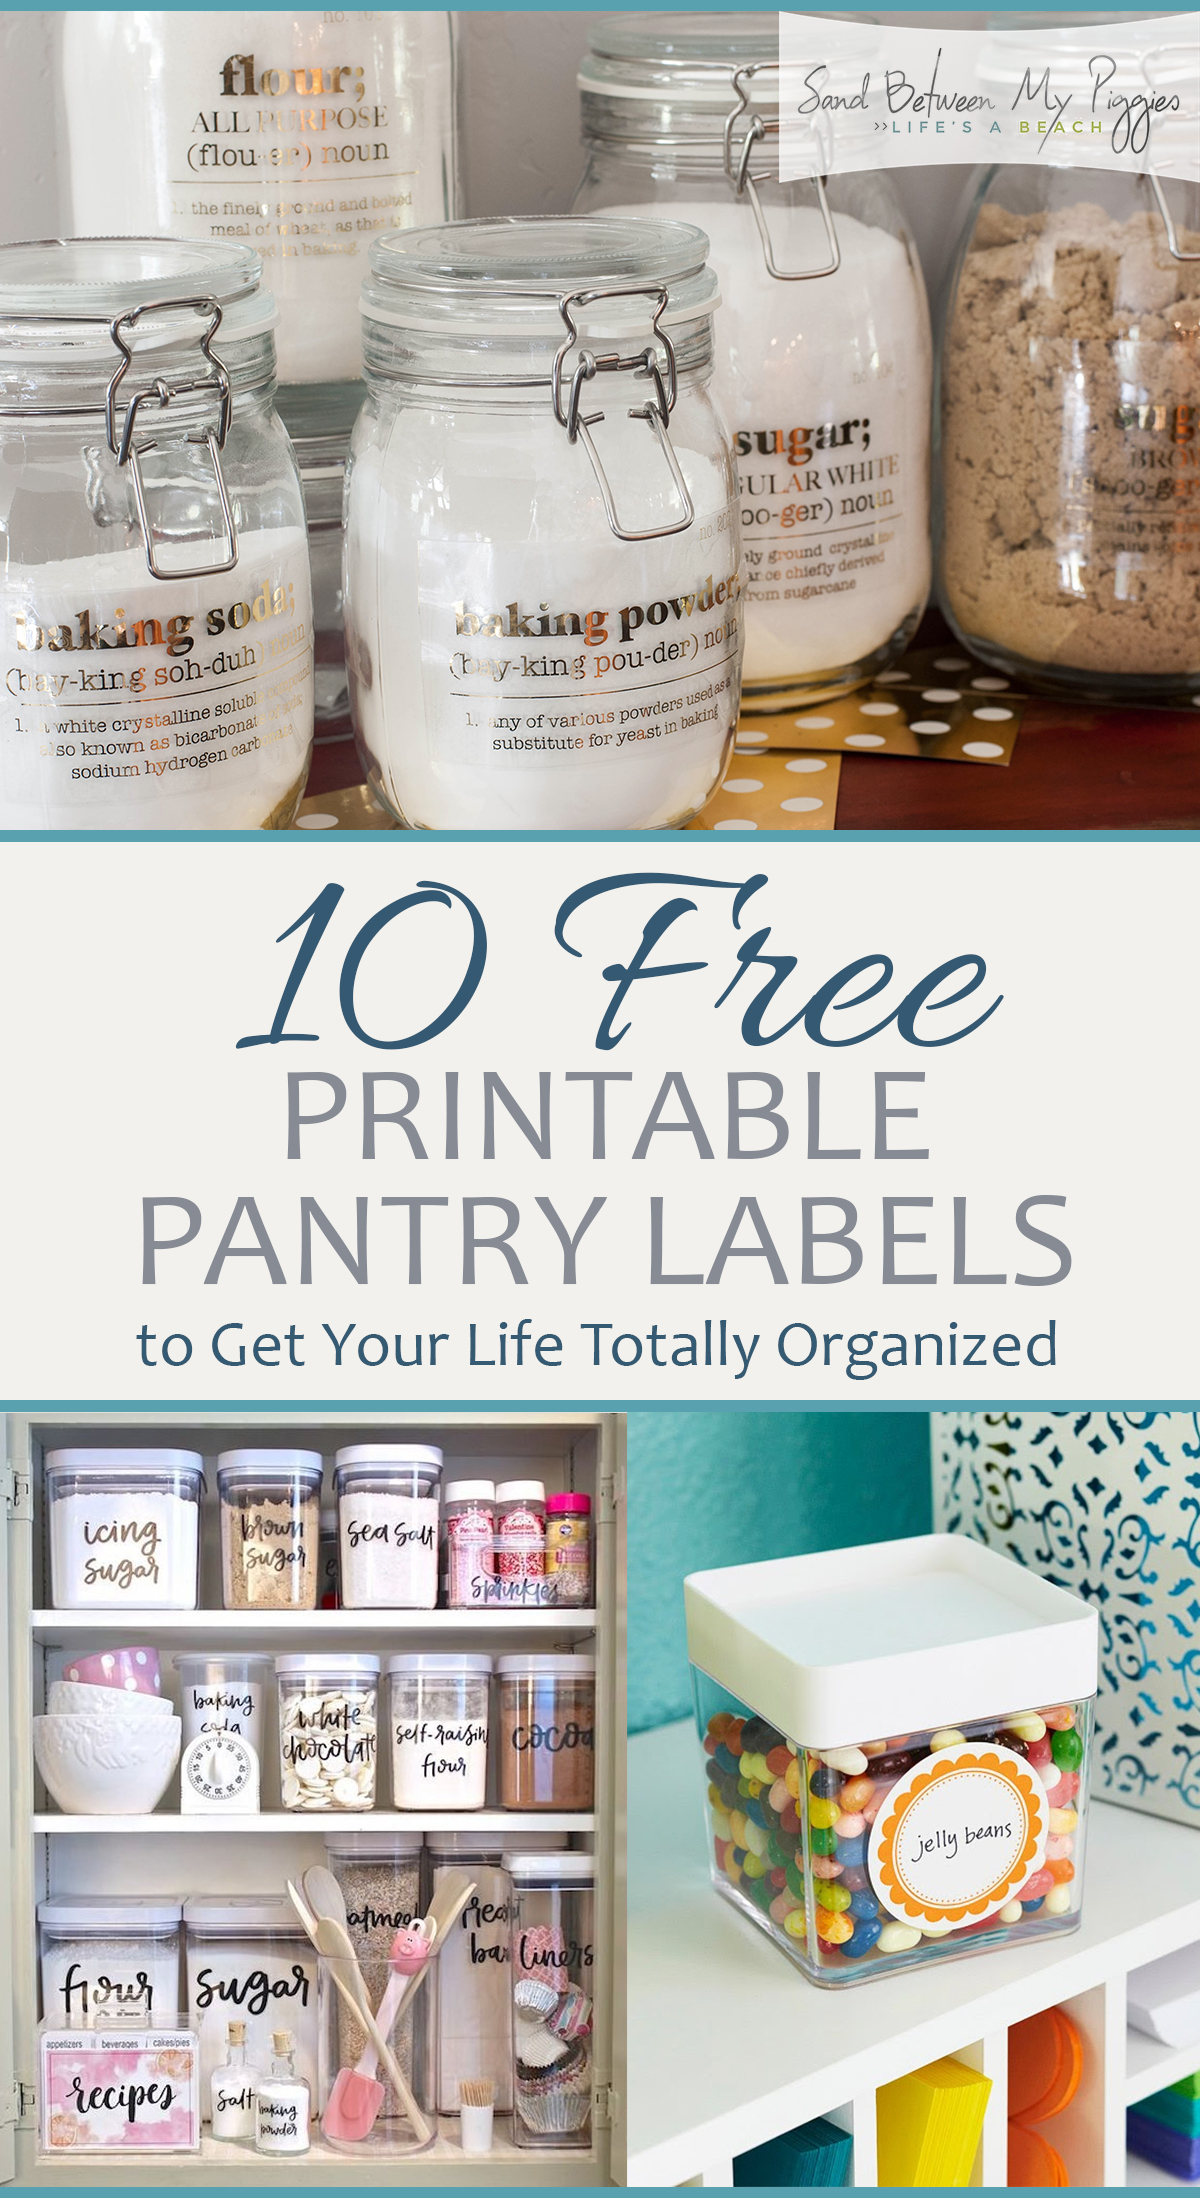 10 free printable pantry labels from Sand Between My Piggies